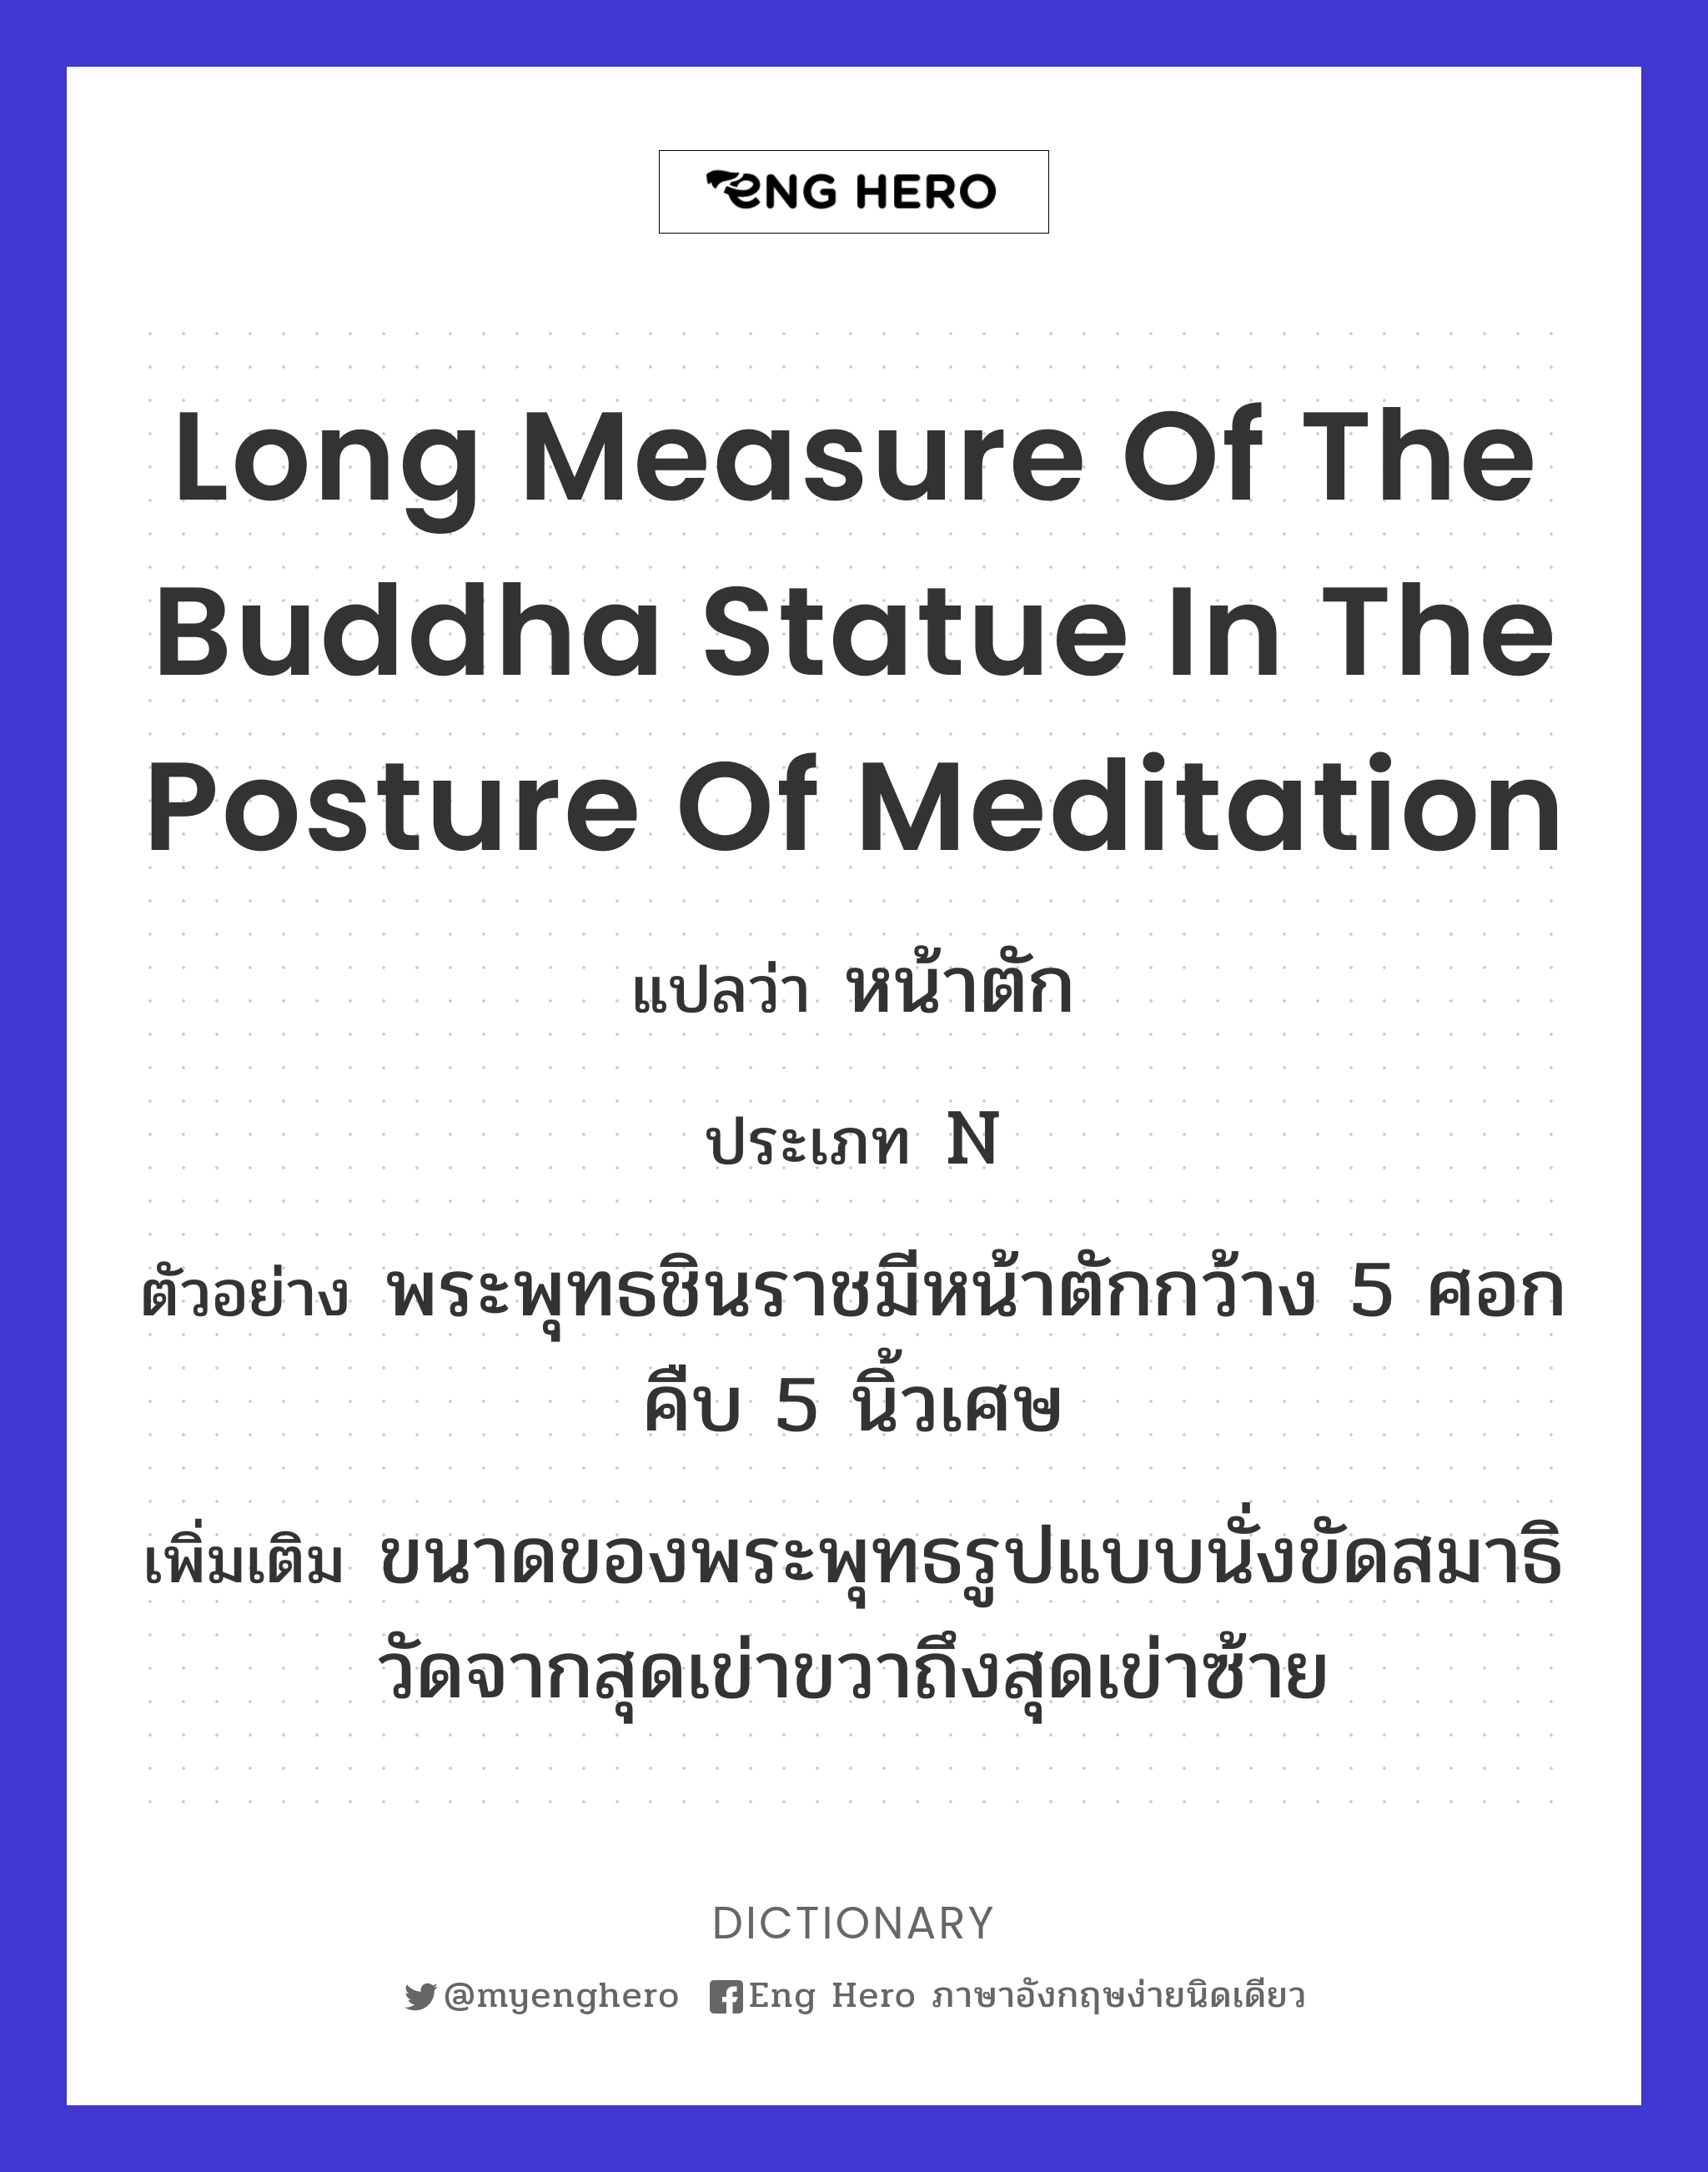 long measure of the Buddha statue in the posture of meditation